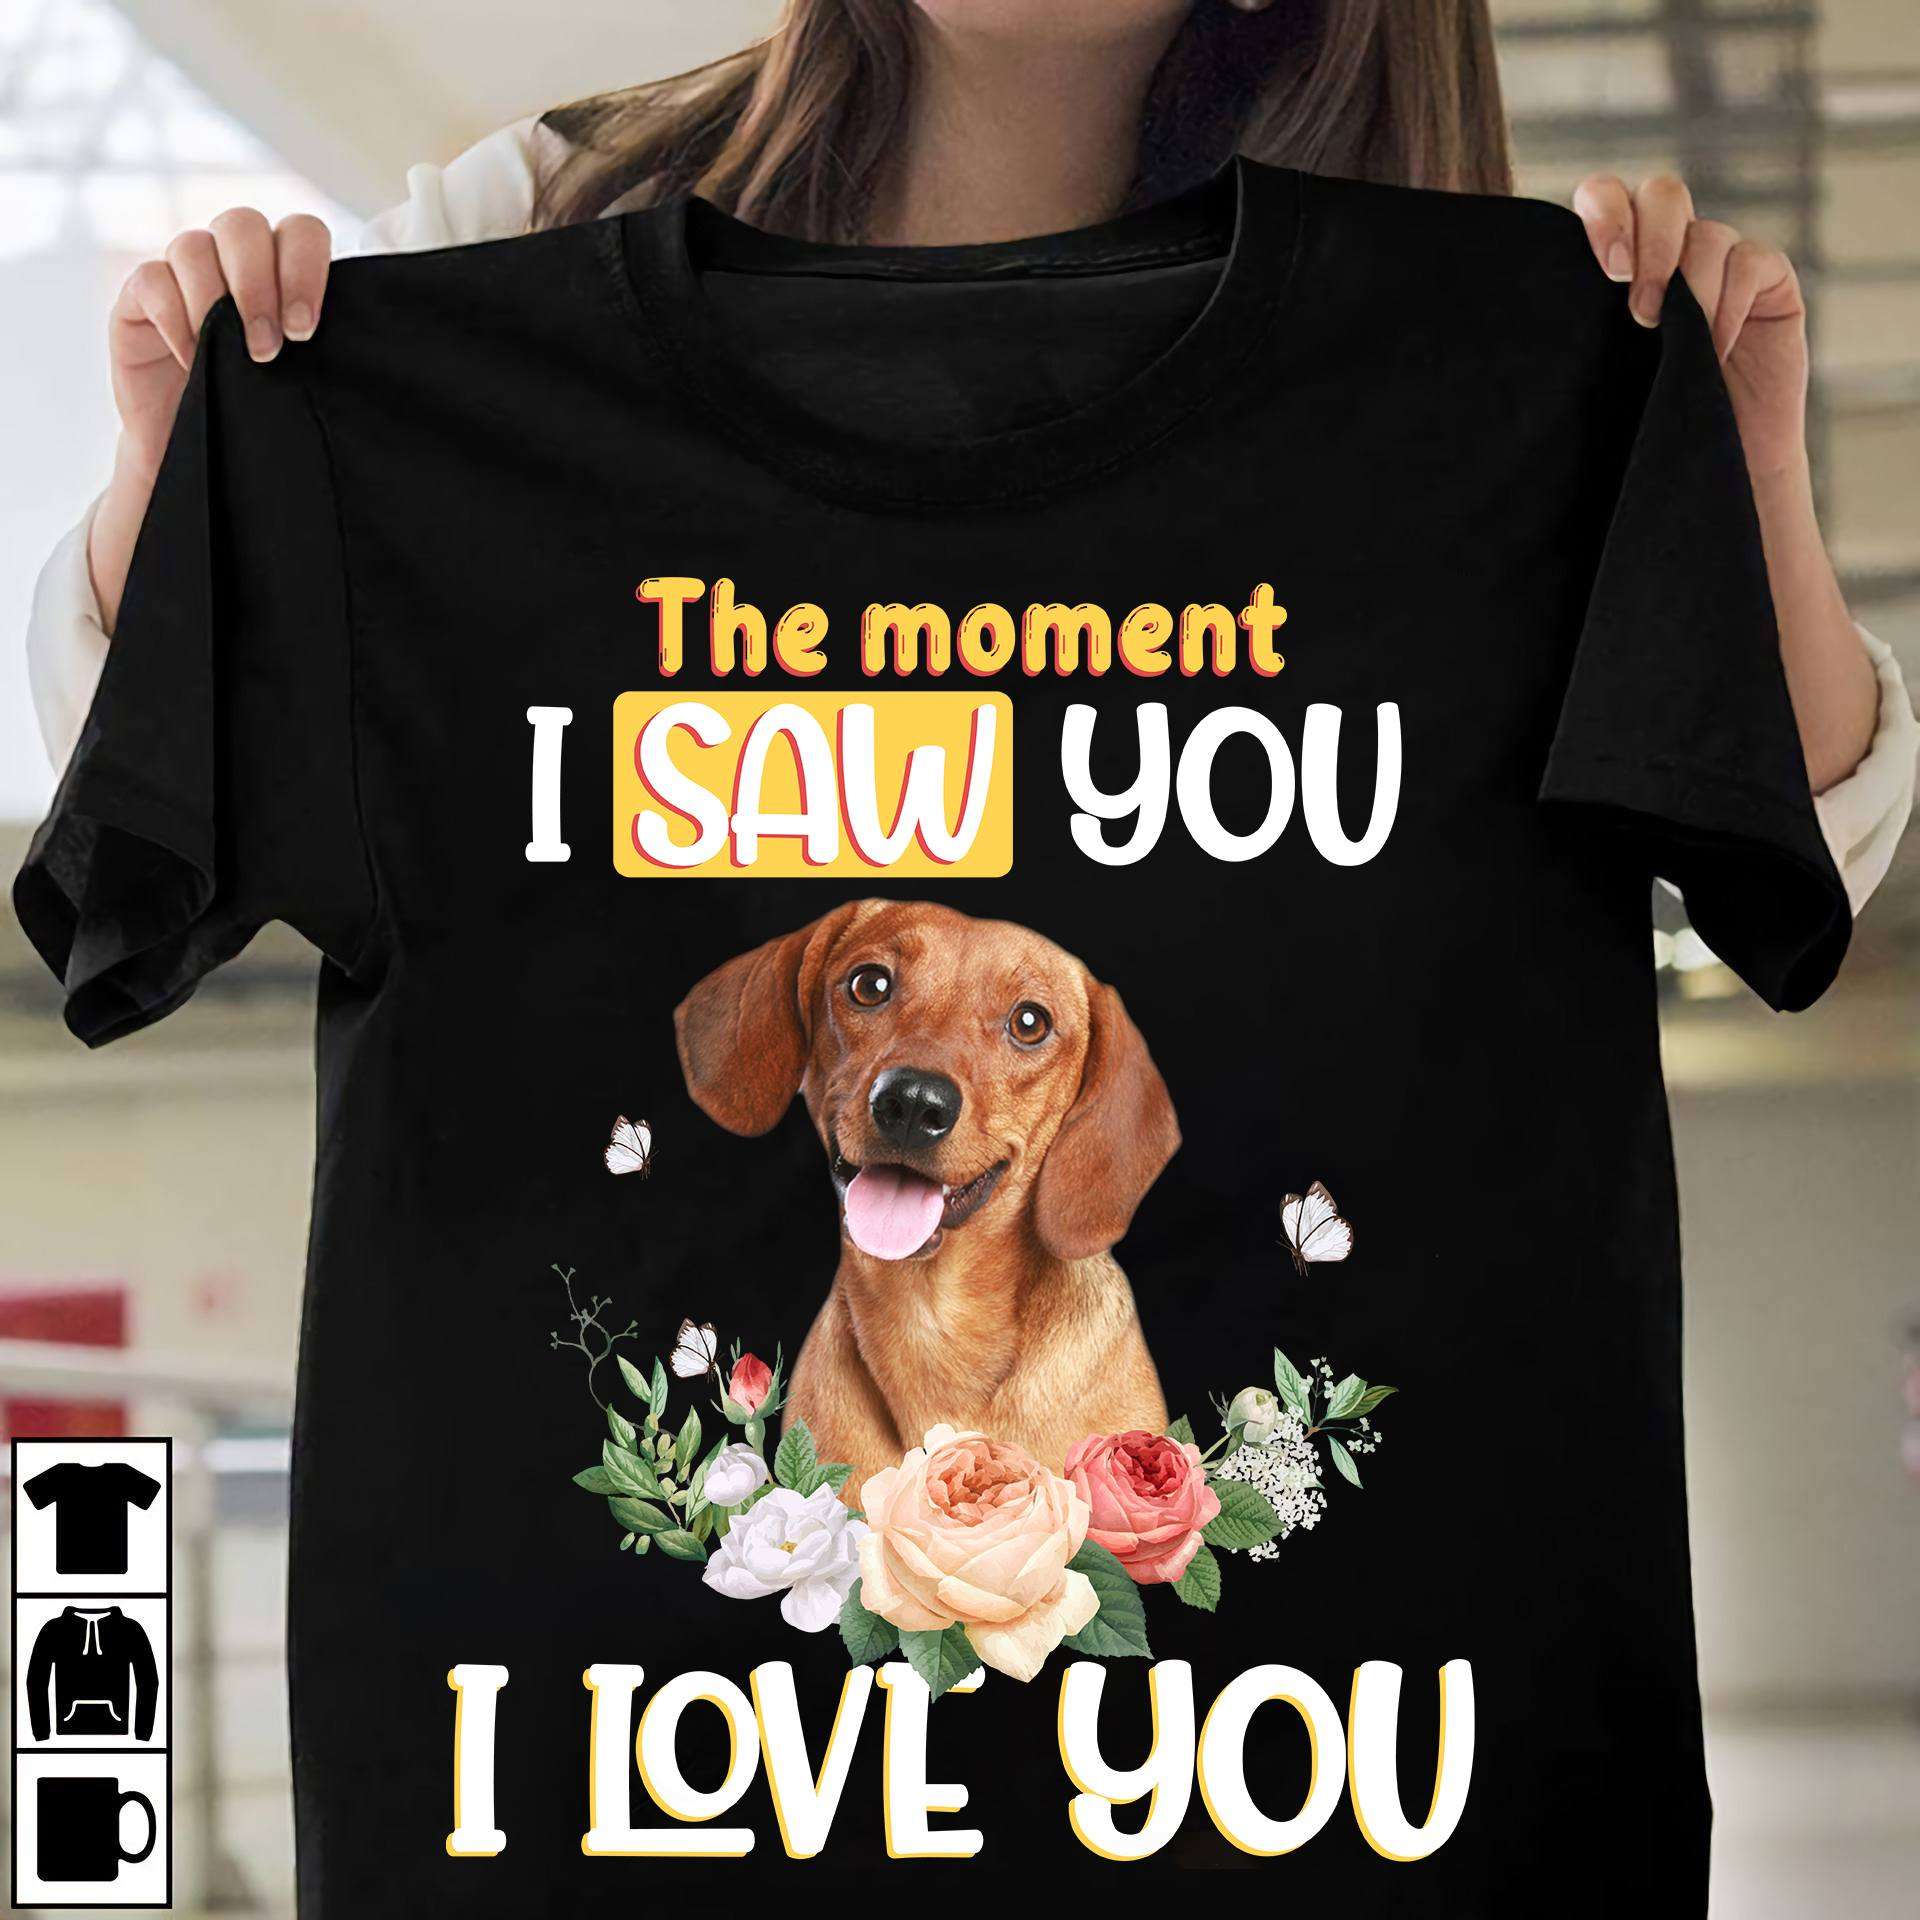 Dachshund Lover - The moment i saw you i love you